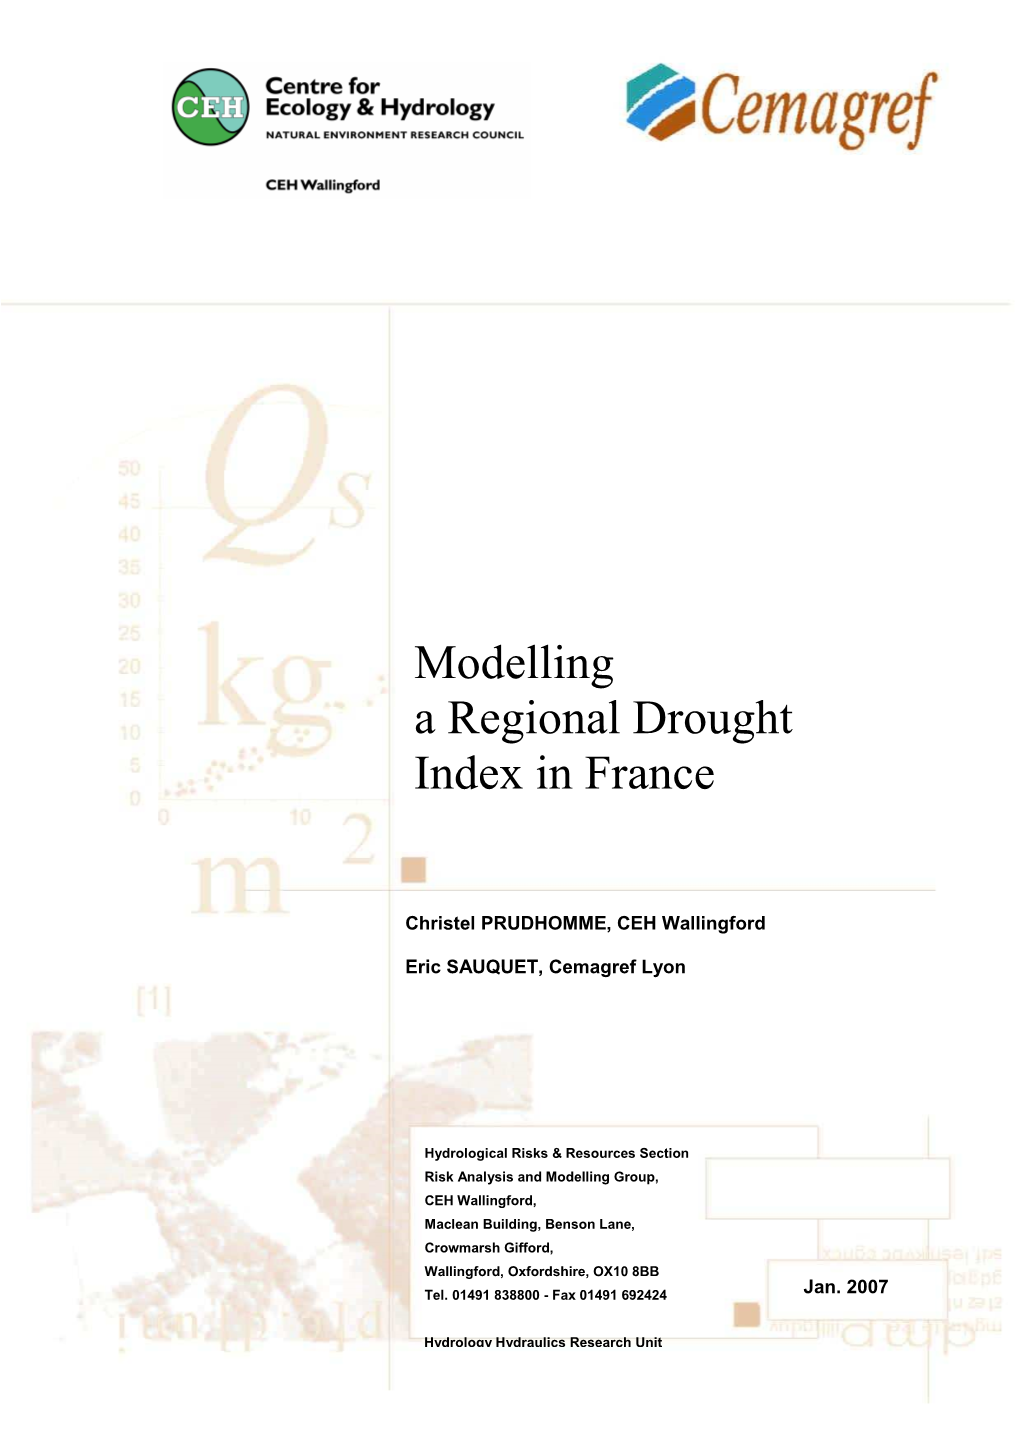 Modelling a Regional Drought Index in France